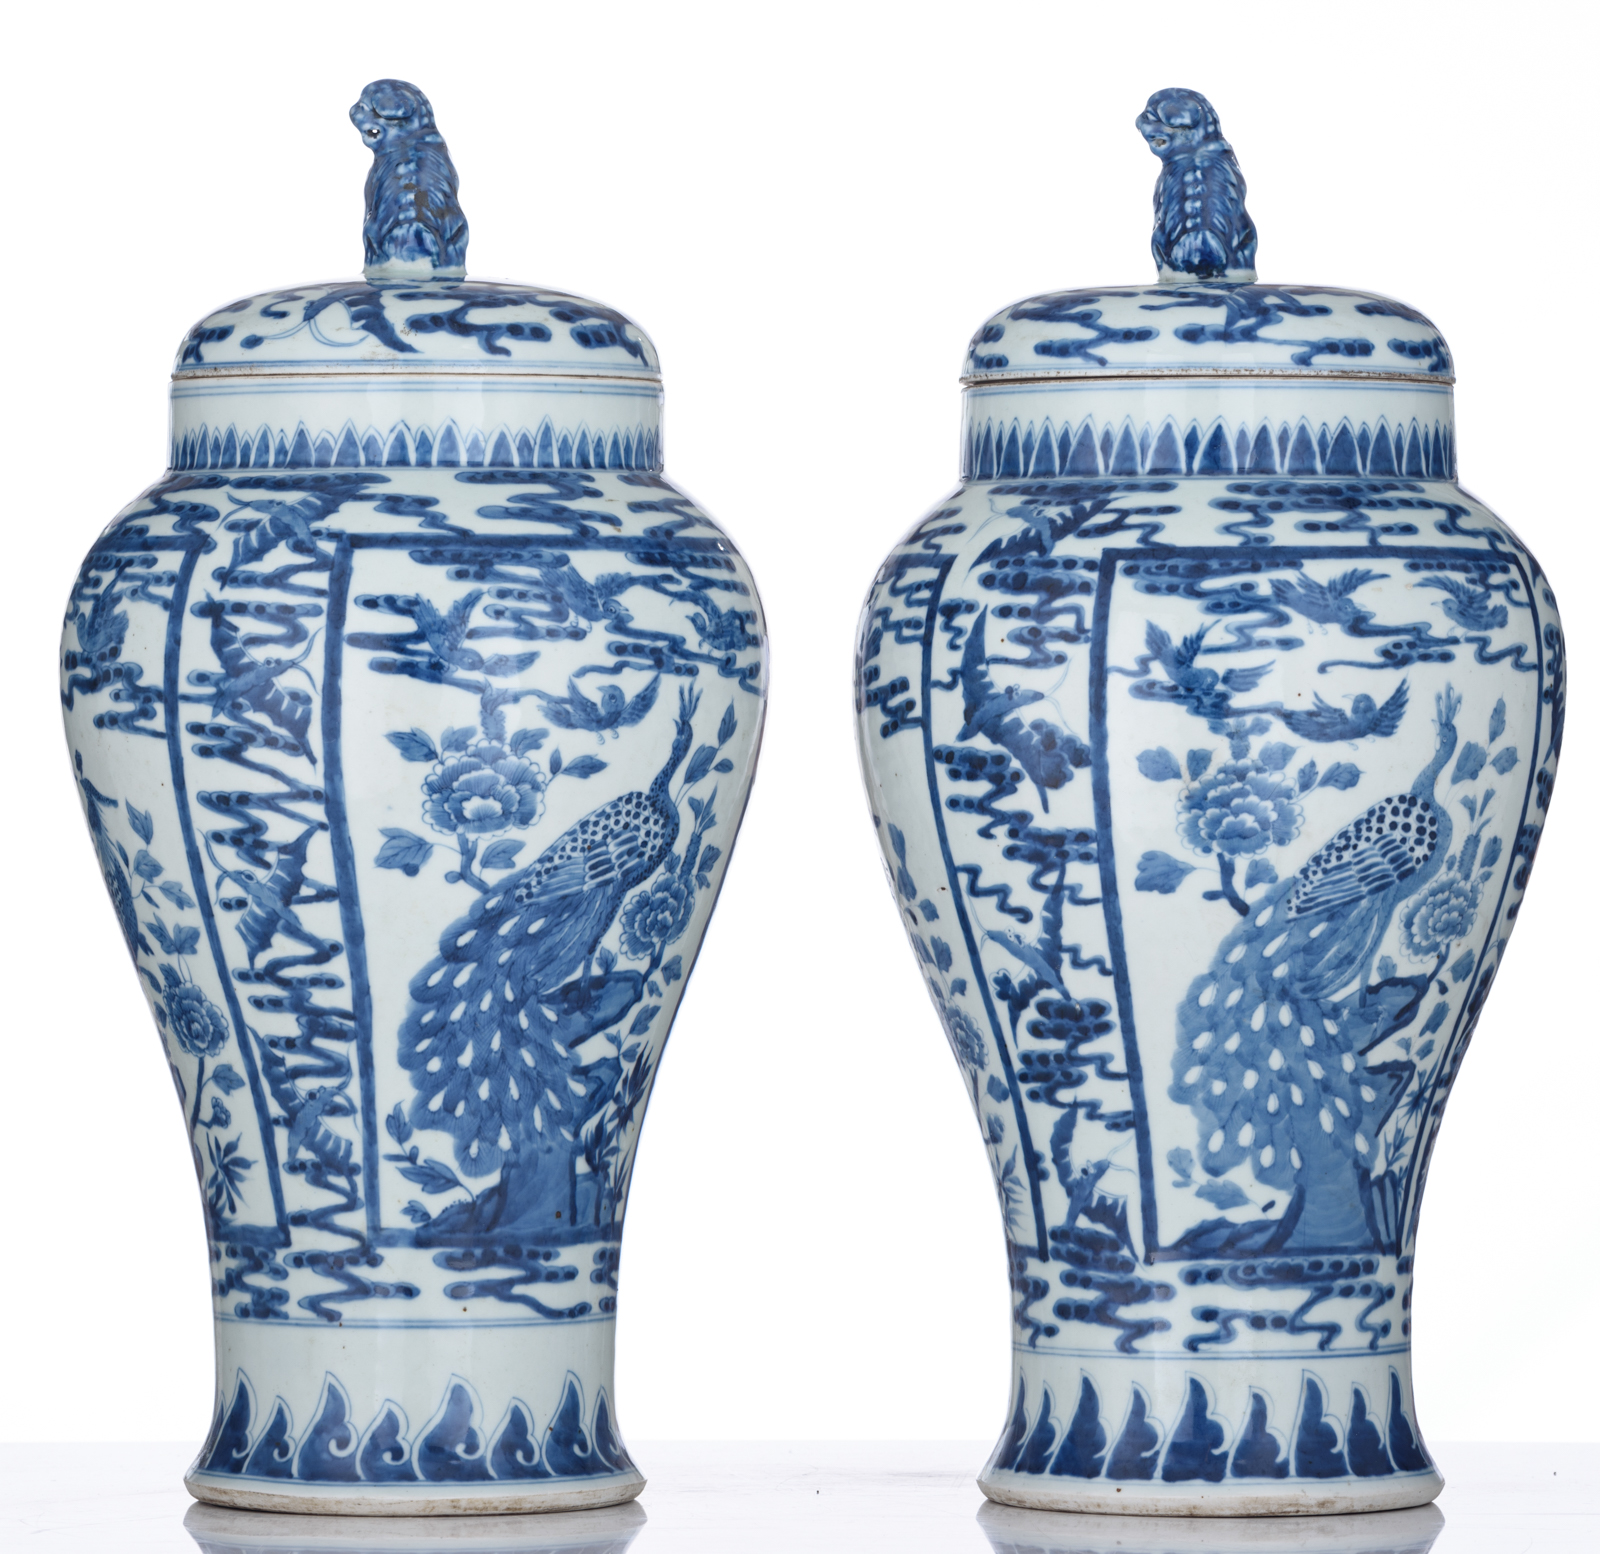 A pair of Chinese blue and white vases and covers, decorated with birds and flowers, 19thC, H 43 cm - Image 2 of 8